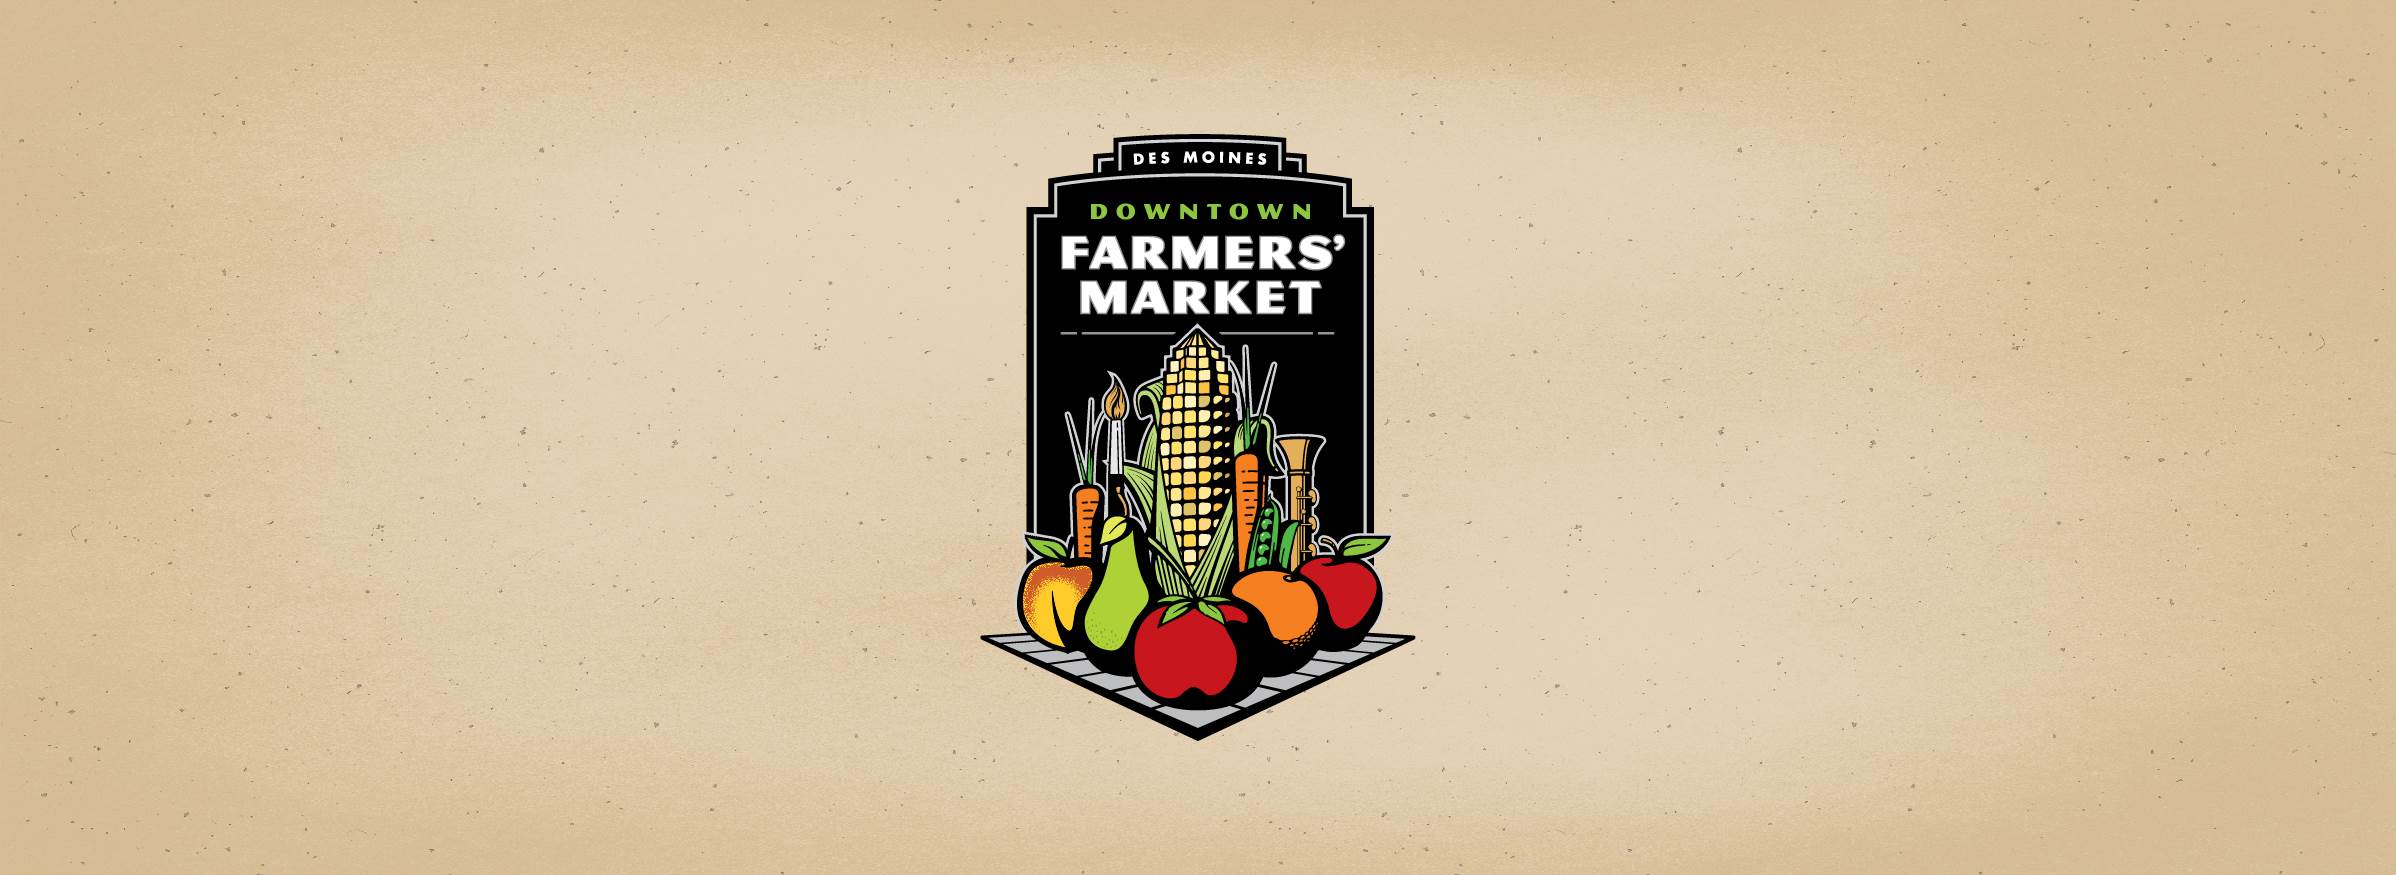 Downtown Farmers' Market Opening Day 2019